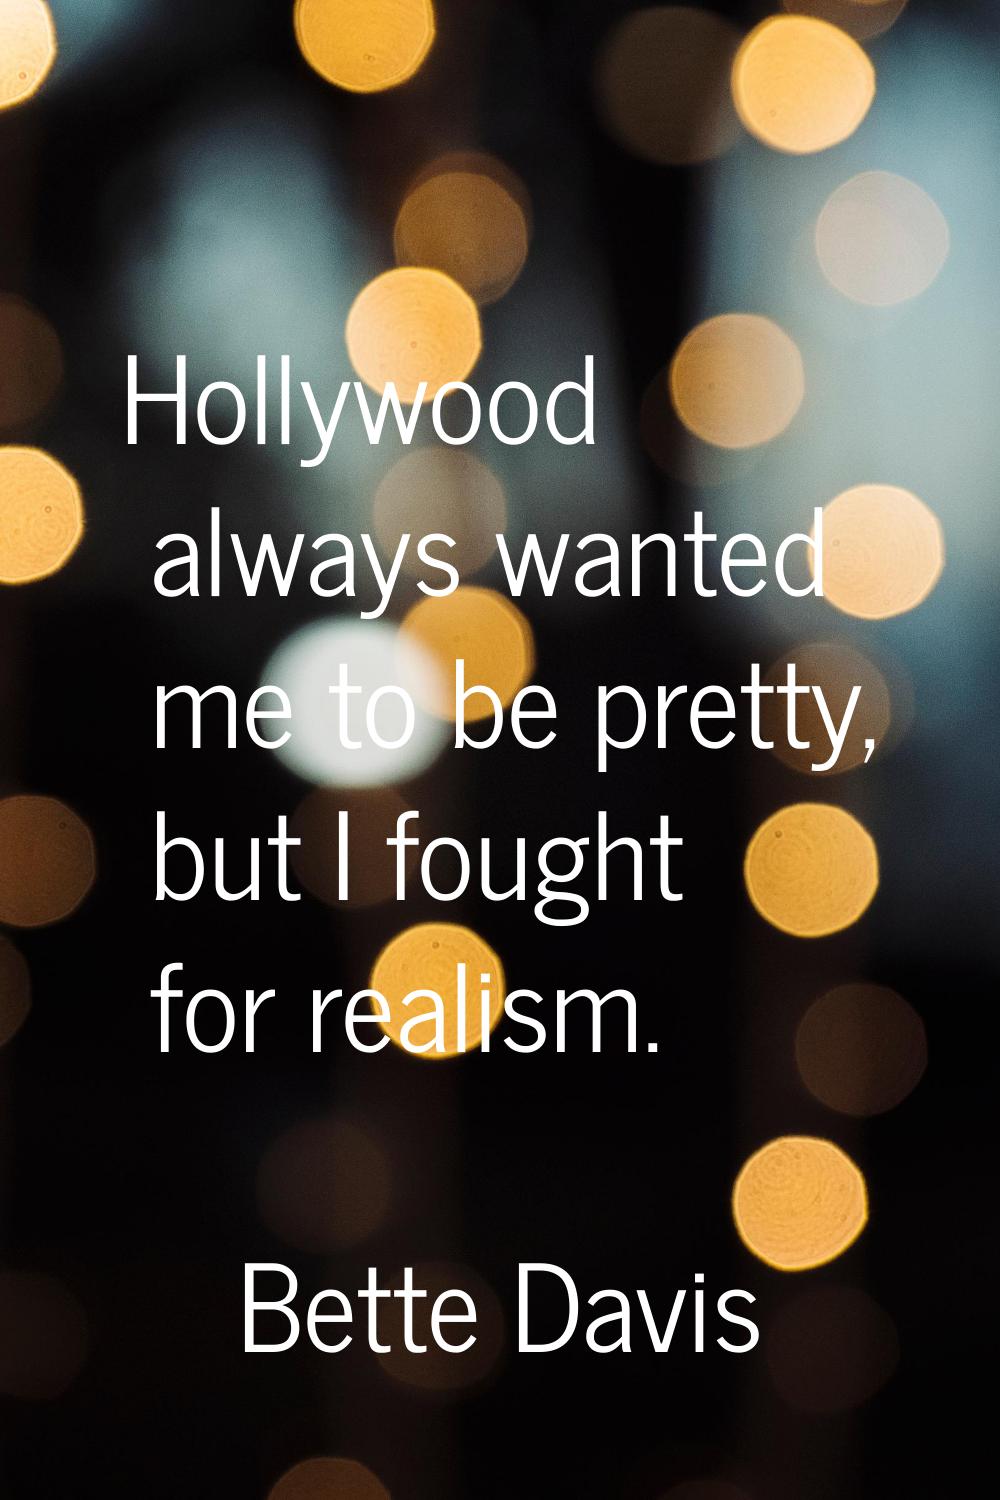 Hollywood always wanted me to be pretty, but I fought for realism.